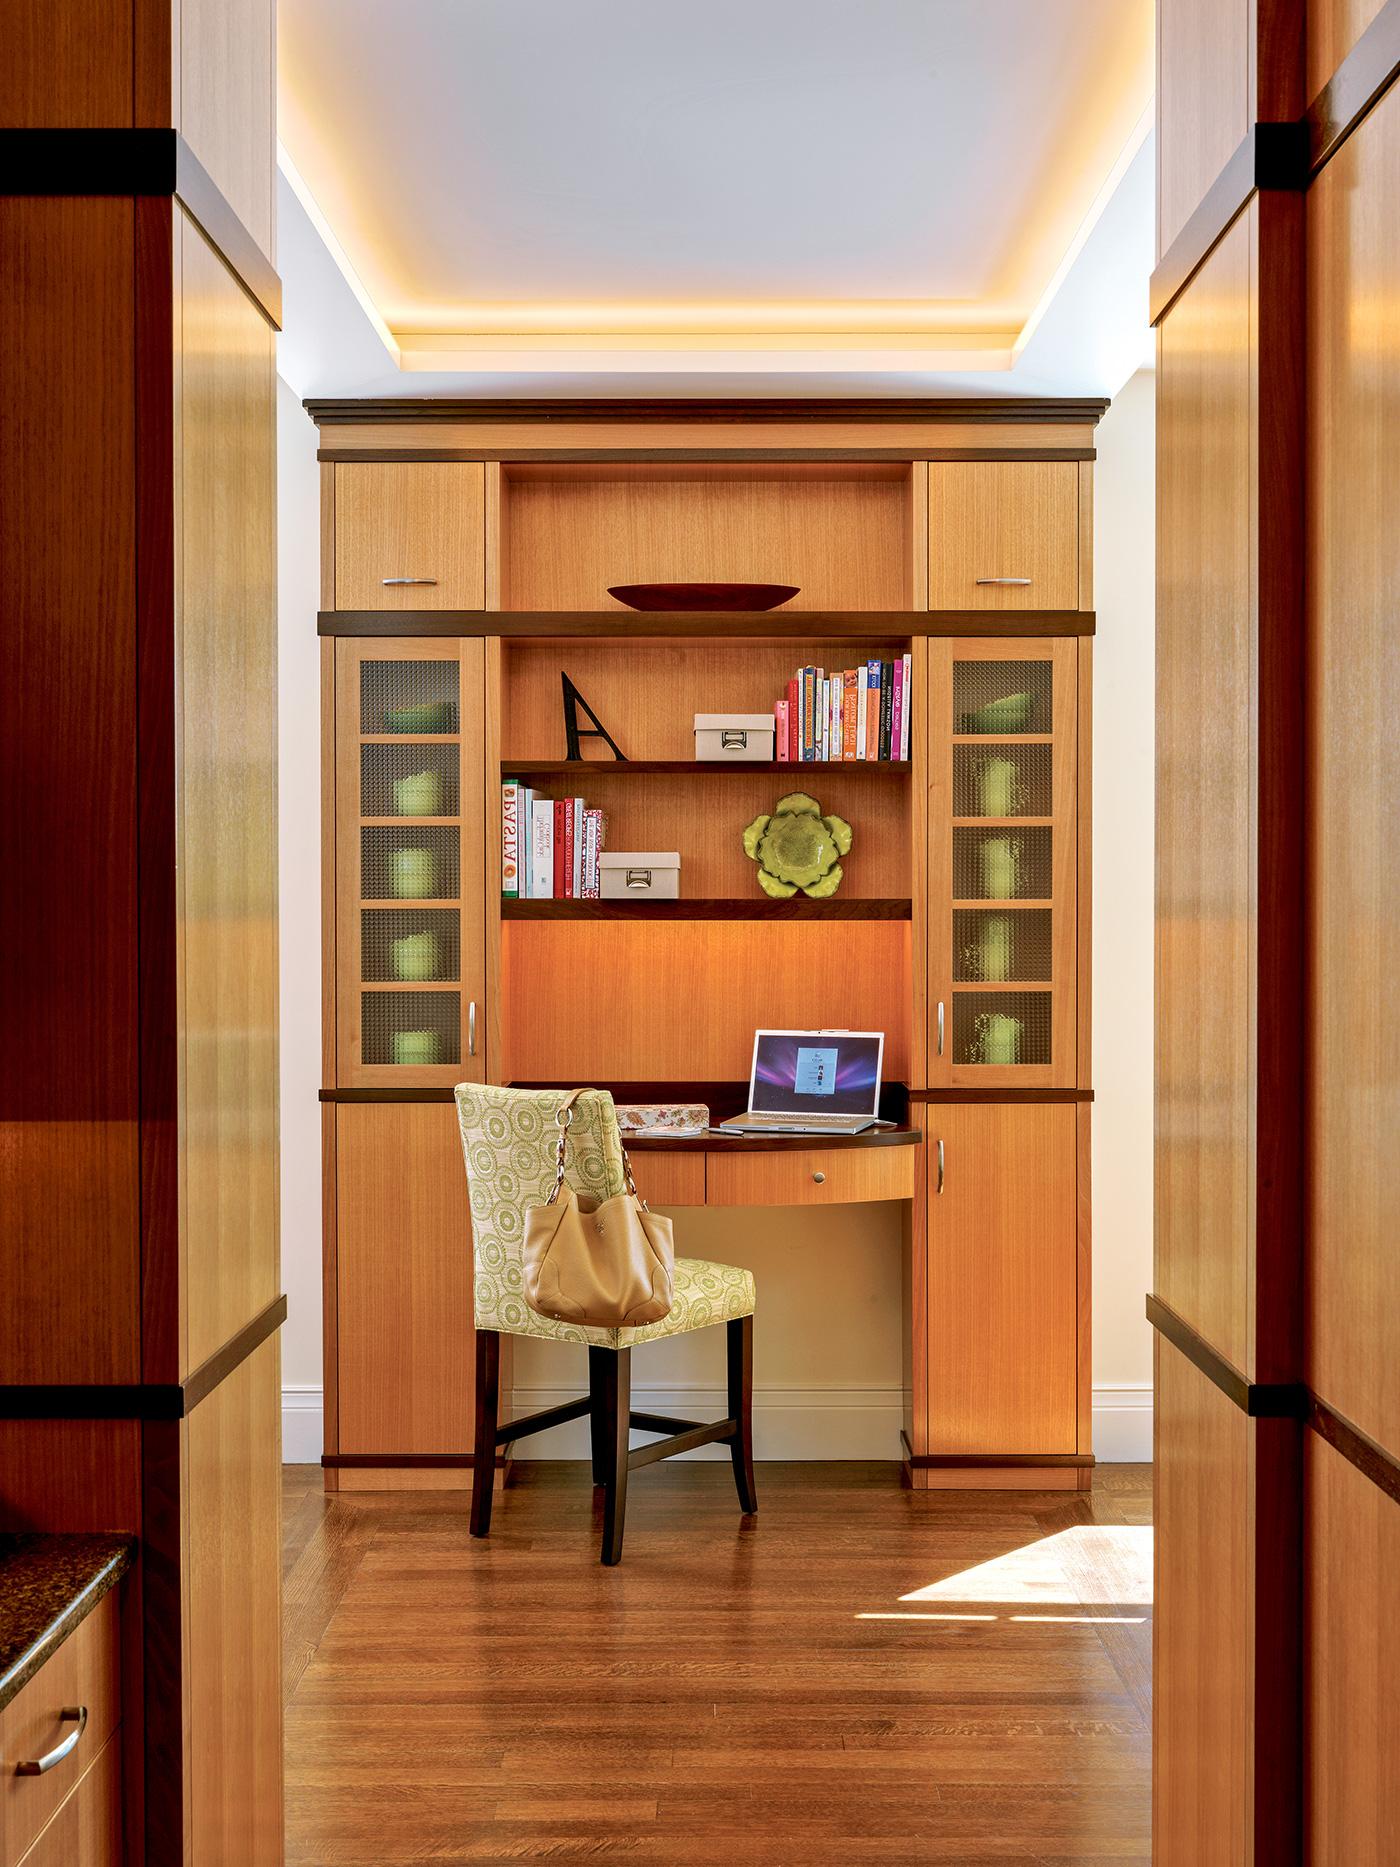 Home office space with custom millwork in a hallway design by Nicholaeff Architecture + Design